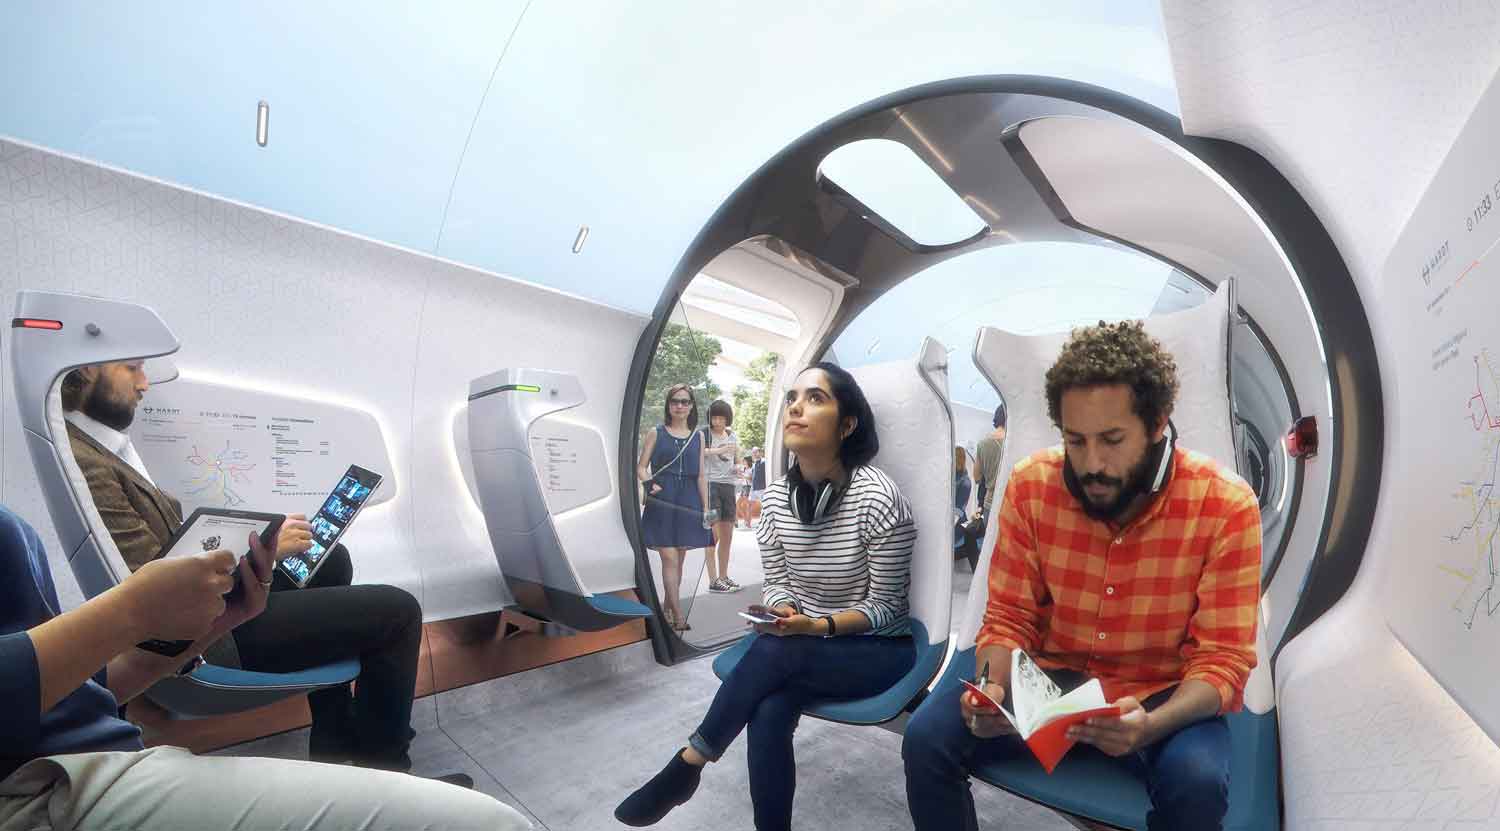 Passengers sit inside a tube-shaped car that other passengers are boarding.